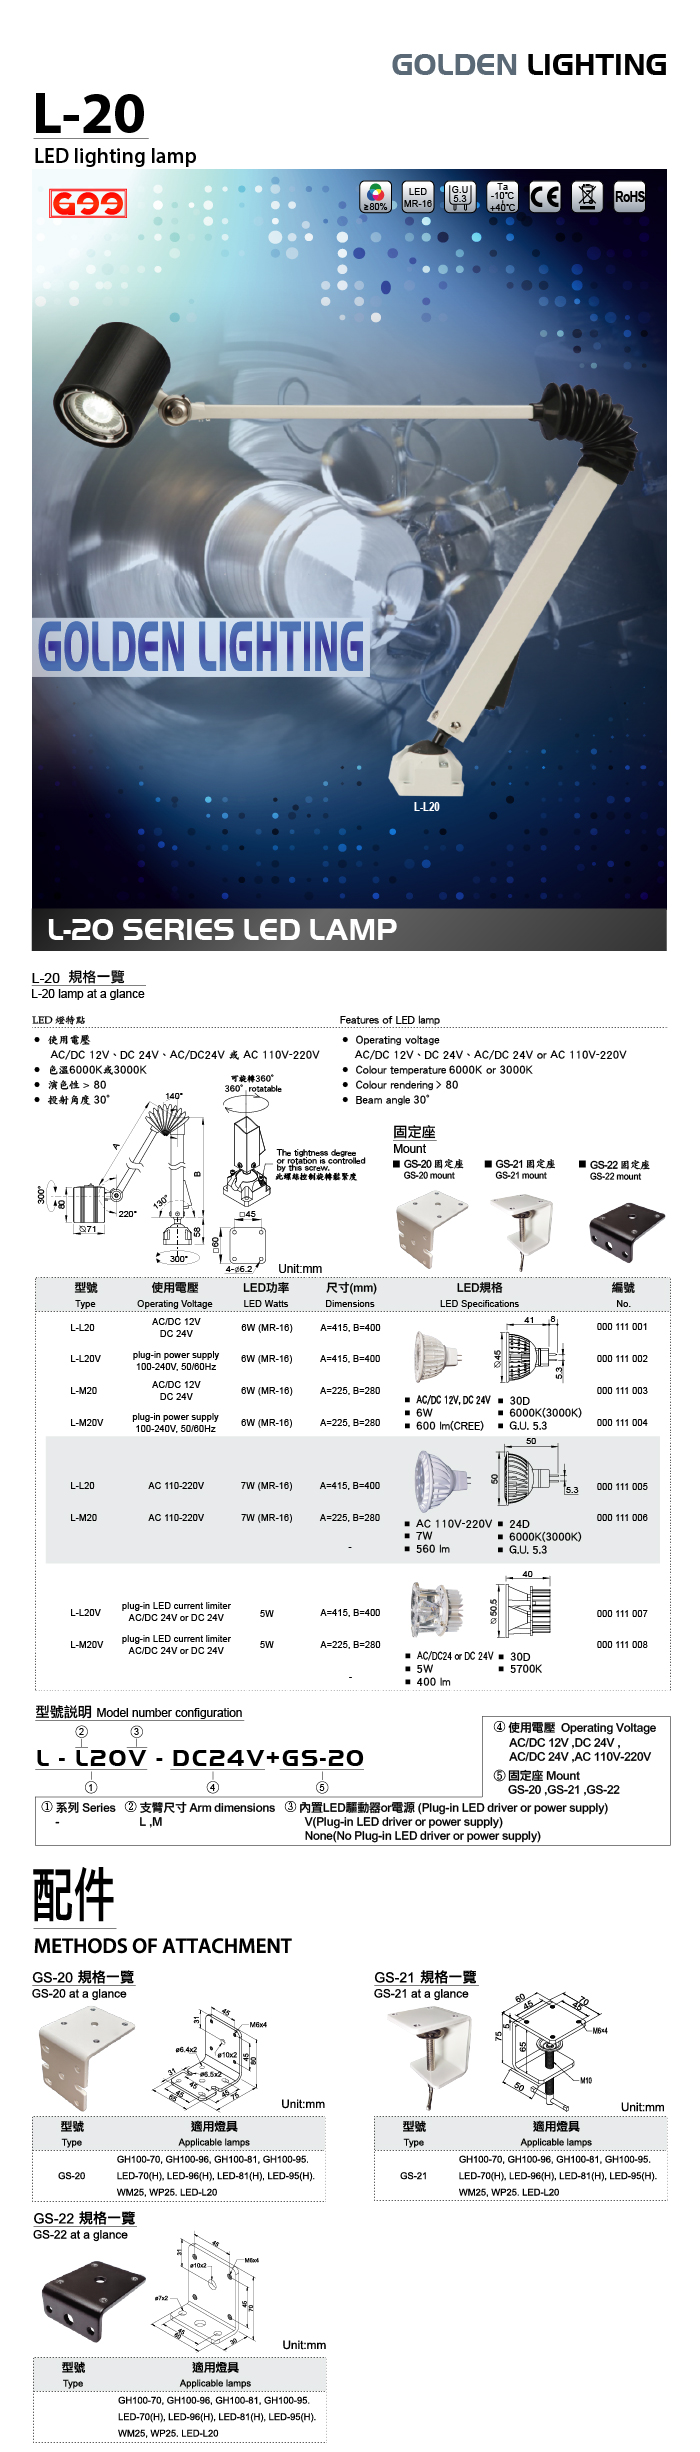 L-20 series CONCENTRATED LED LIGHTING LAMP